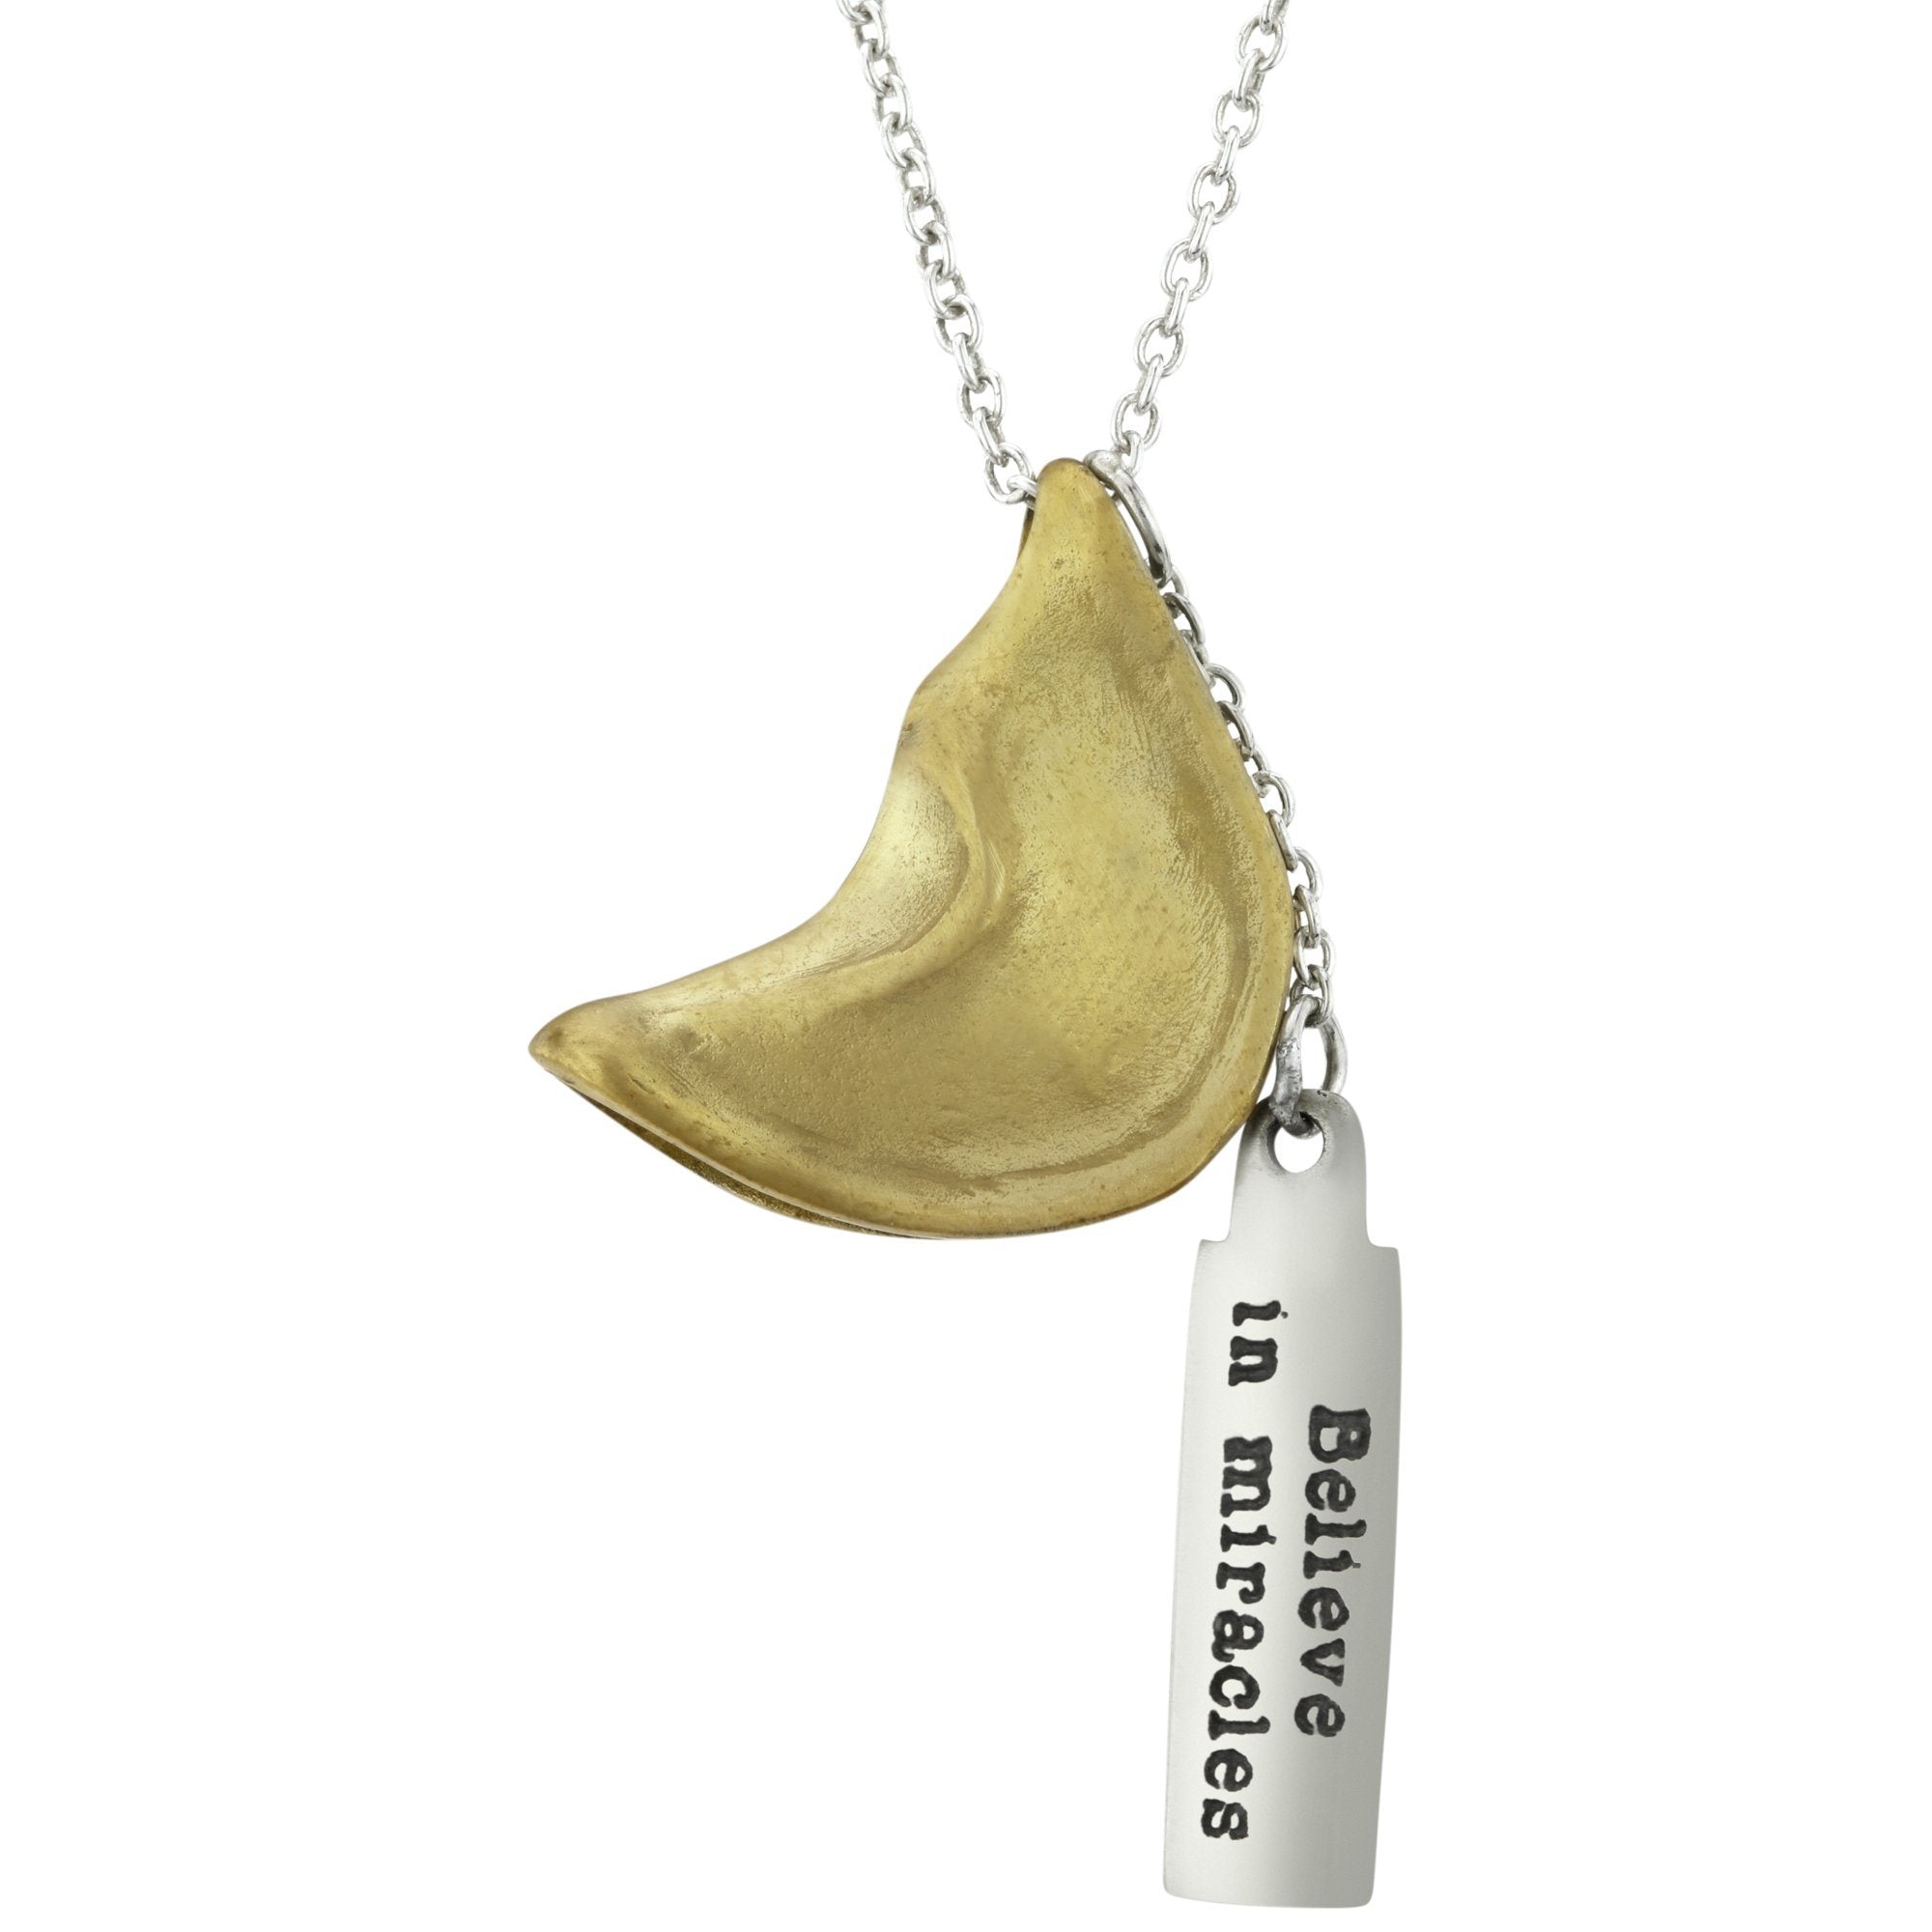 Fortunes Never Lie Sterling Necklace - Believe In Miracles